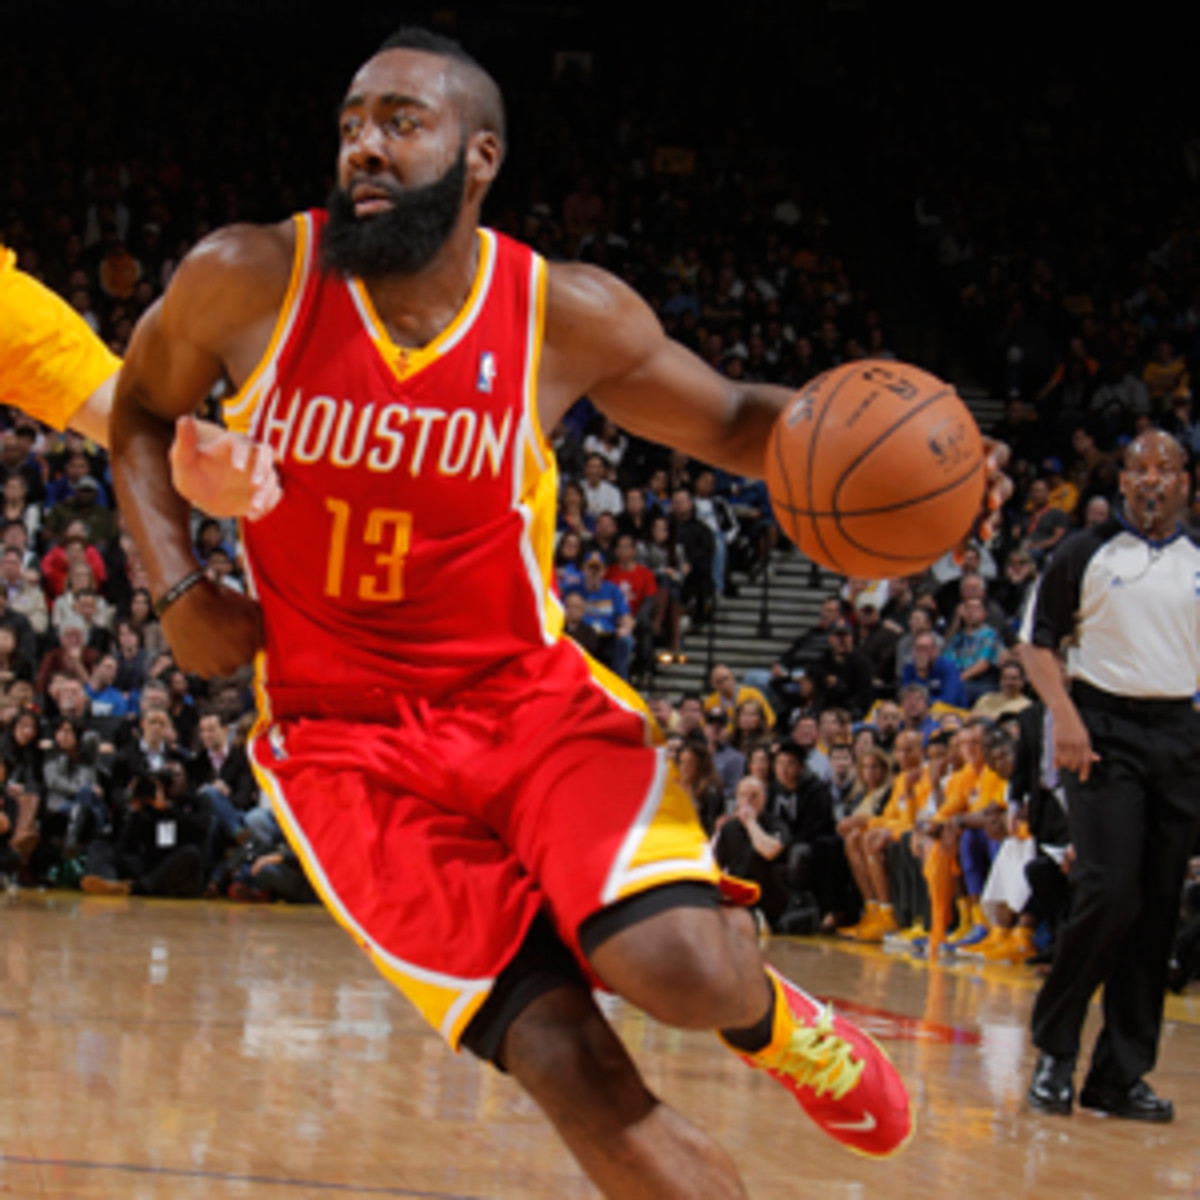 James Harden has missed only one game since injuring his right foot on Feb. 12. (Rockey Widner/NBAE via Getty Images)